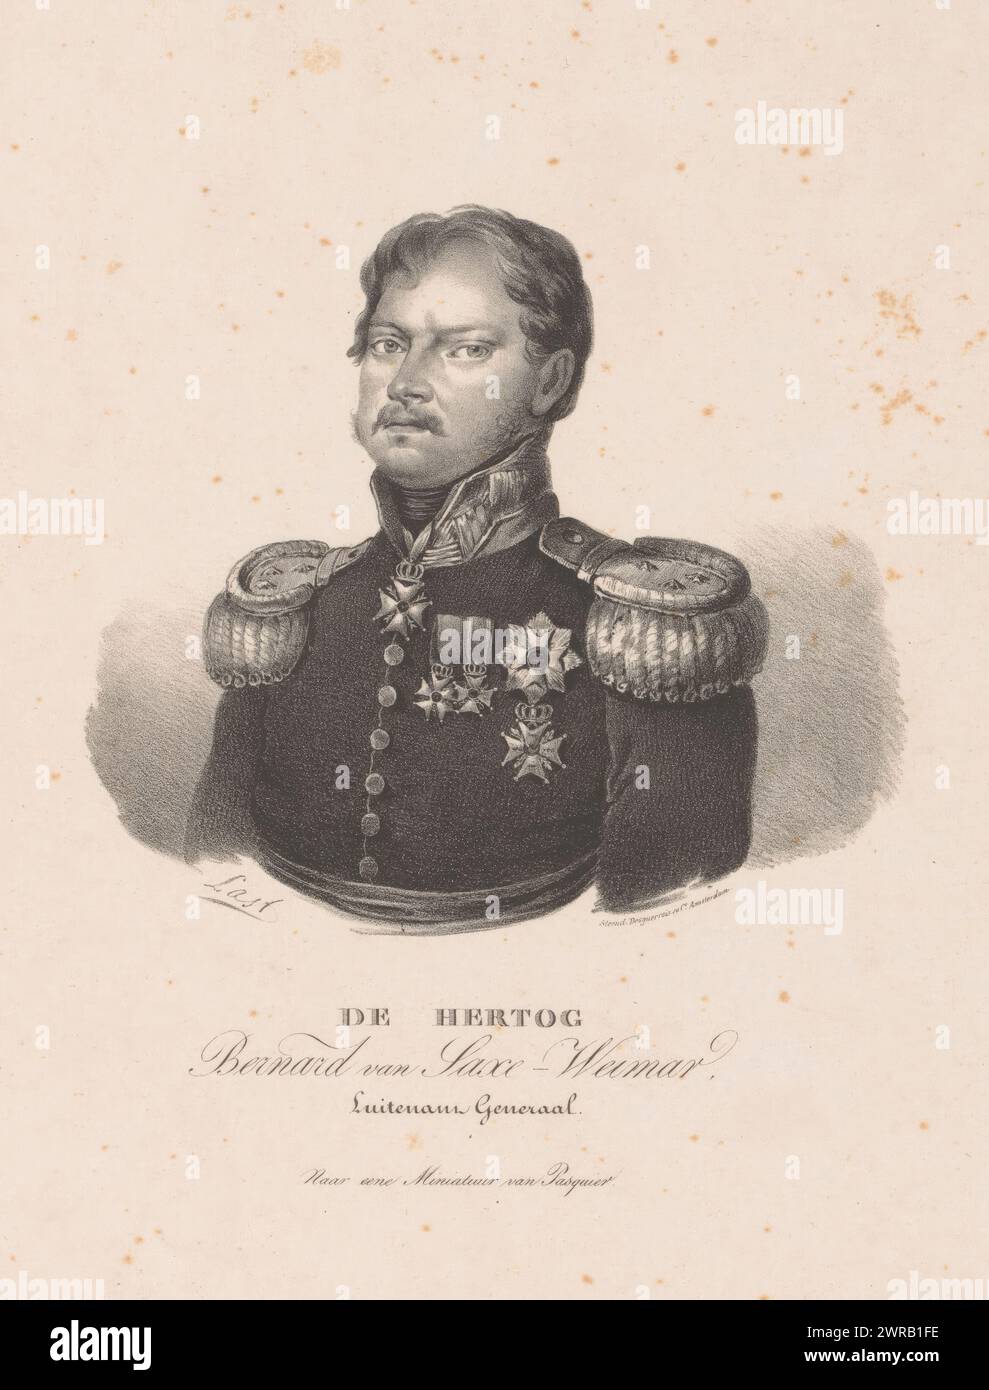 Portrait of Charles Bernhard of Saxe-Weimar-Eisenach, The Duke Bernard of Saxe-Weimar (title on object), The sitter wears a military costume with epaulettes with three stars and knighthoods., print maker: Carel Christiaan Antony Last, after design by: Pasquier le jeune, printer: Desguerrois & Co., print maker: Netherlands, printer: Amsterdam, 1818 - 1876, paper, height 310 mm × width 215 mm, print Stock Photo